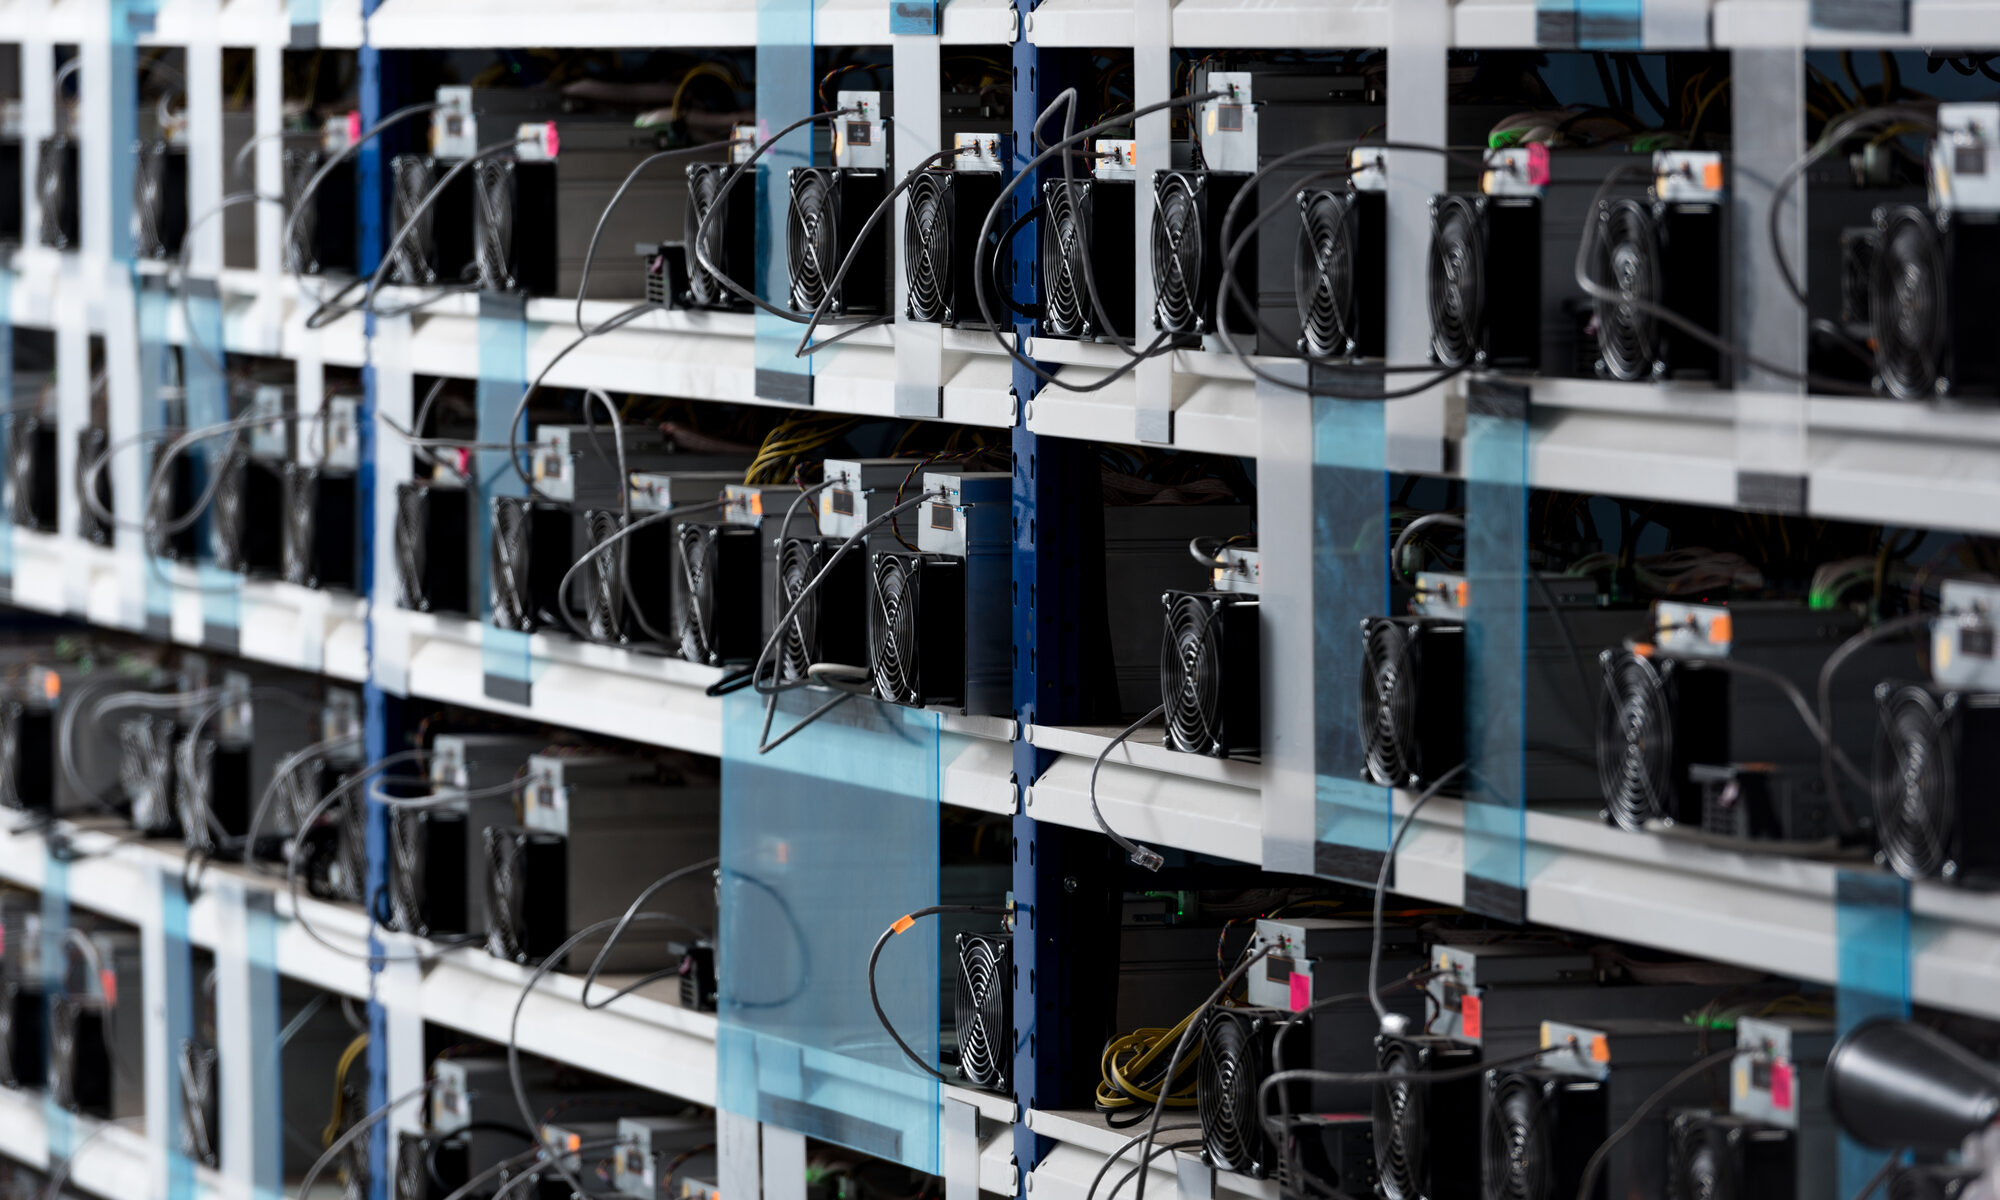 Several mining rigs are st up to mint fresh Bitcoins.